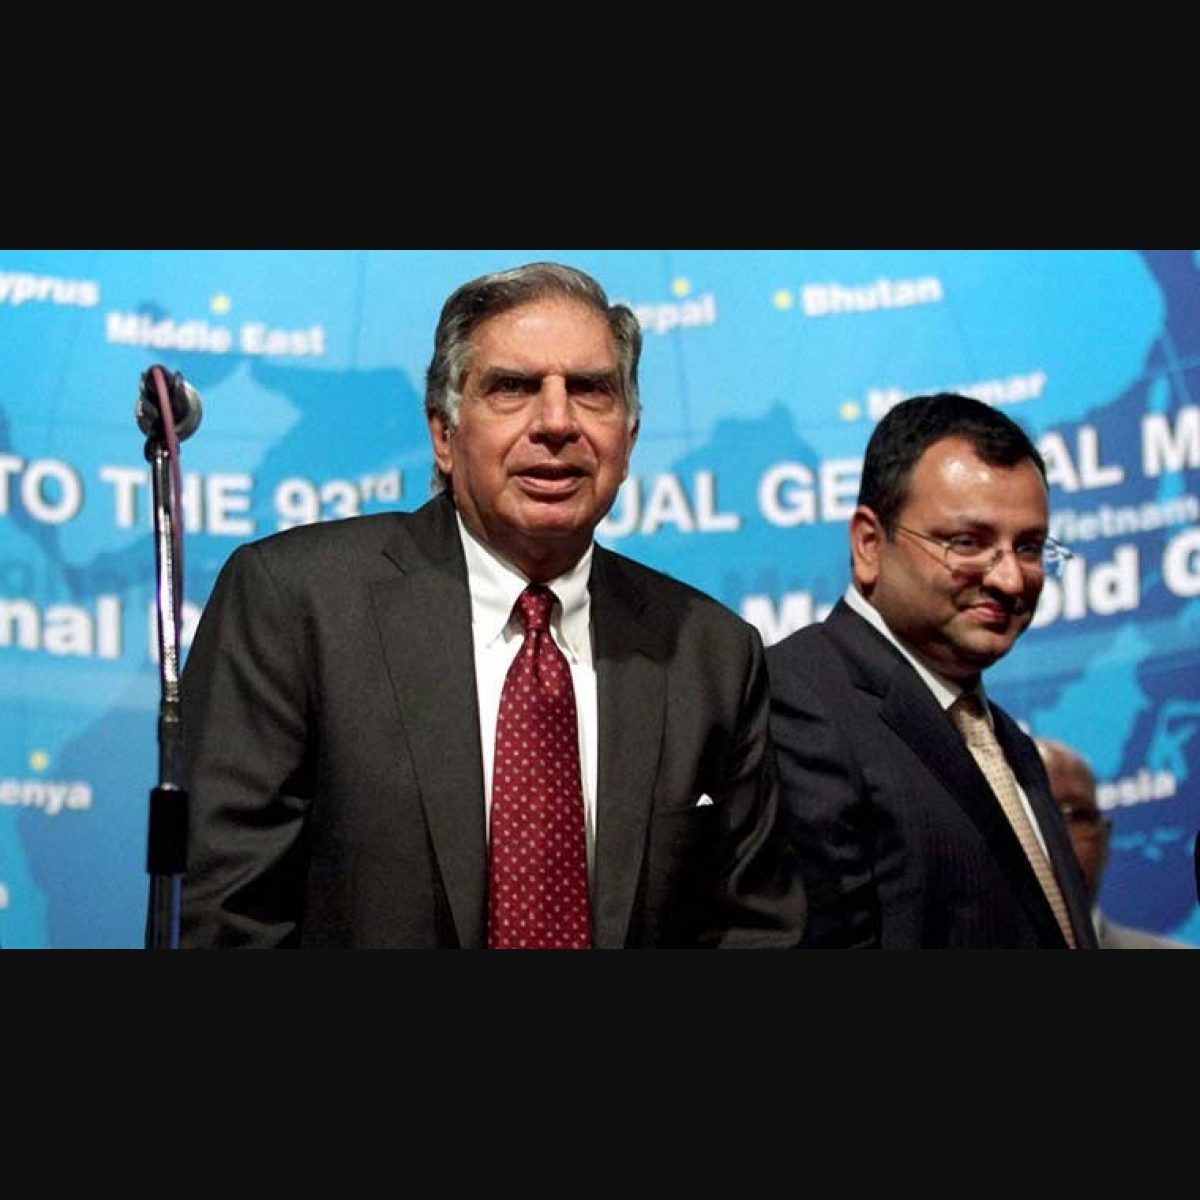 Ratan Tata dismisses rumours, says 'have no associations with